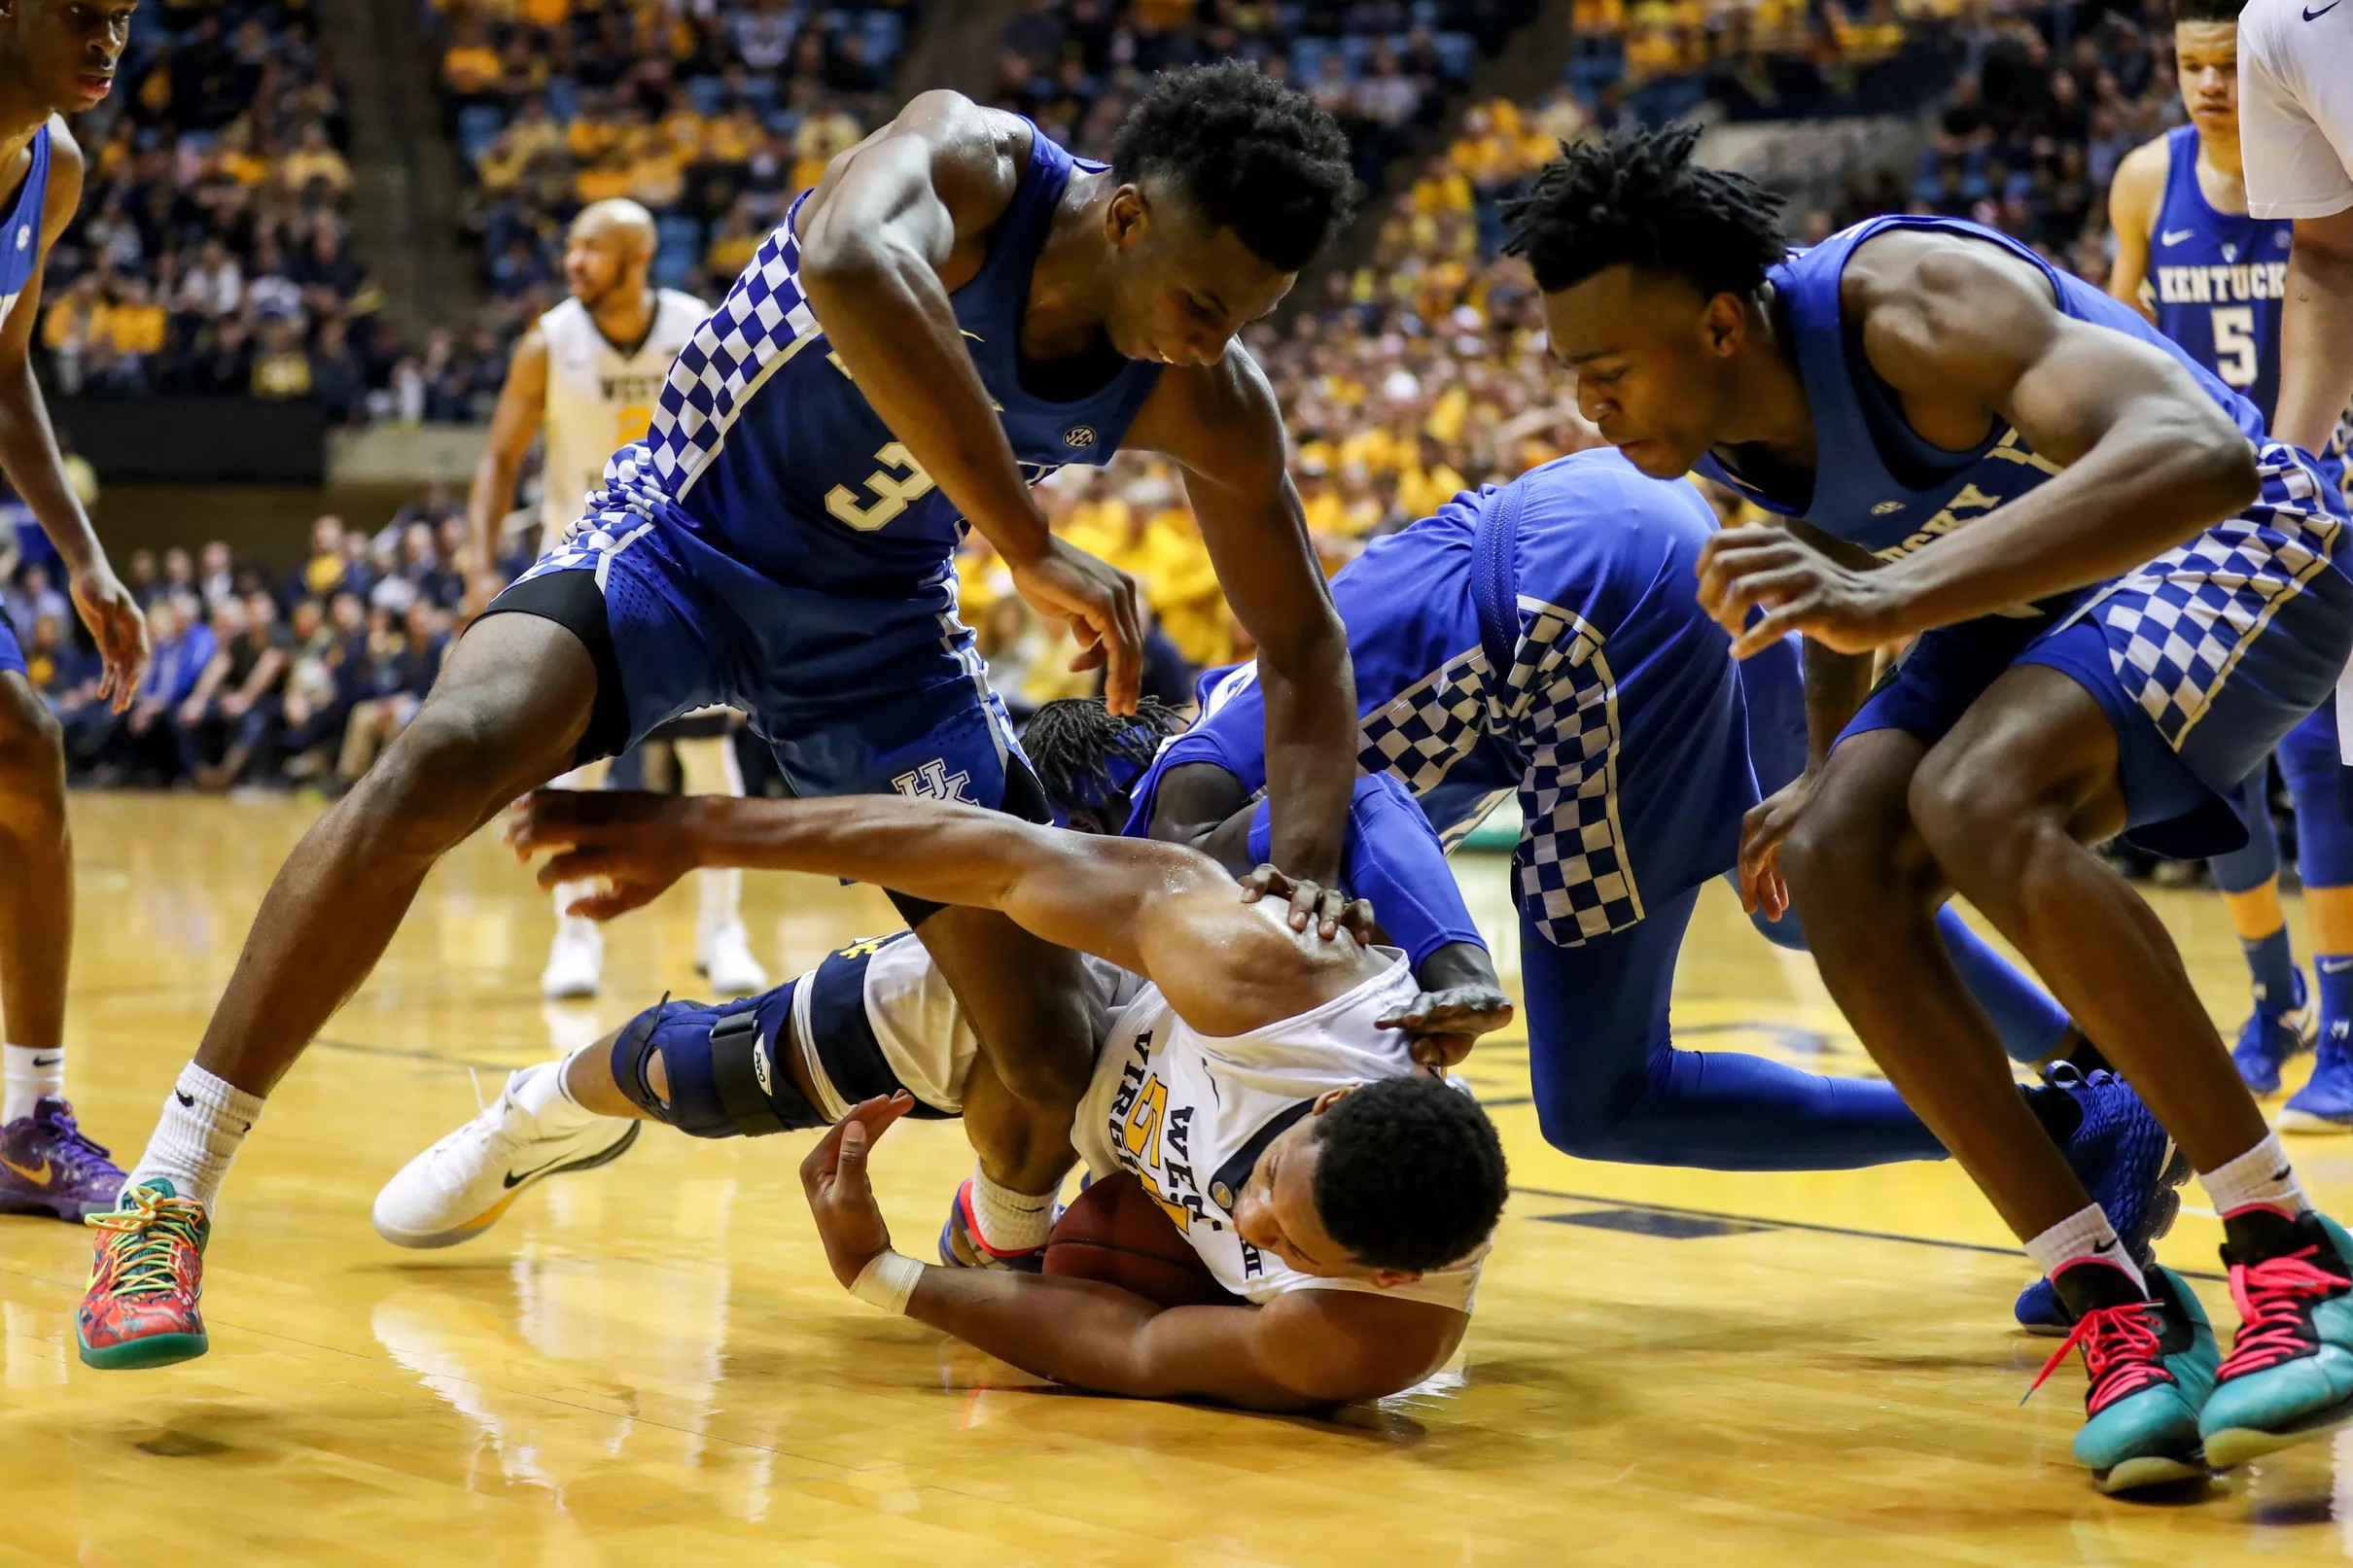 AP top 25 The Big 12/SEC Challenge shakes up the poll